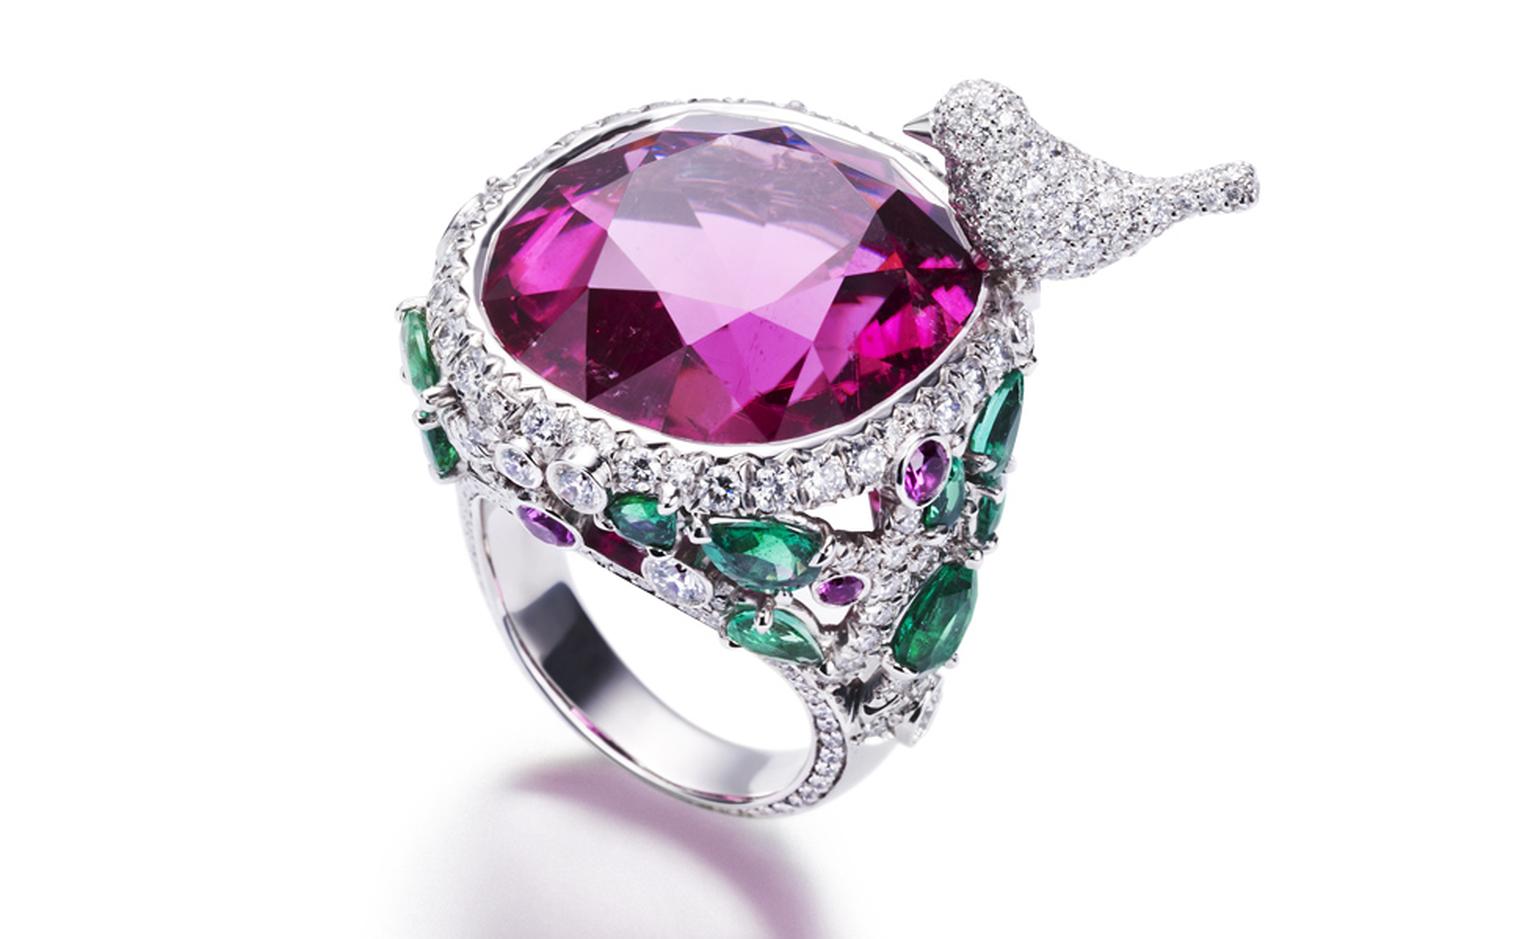 PIAGET, Limelight Garden Party, white gold gold ring set with diamonds, emeralds, rubellite and pink sapphires. POA